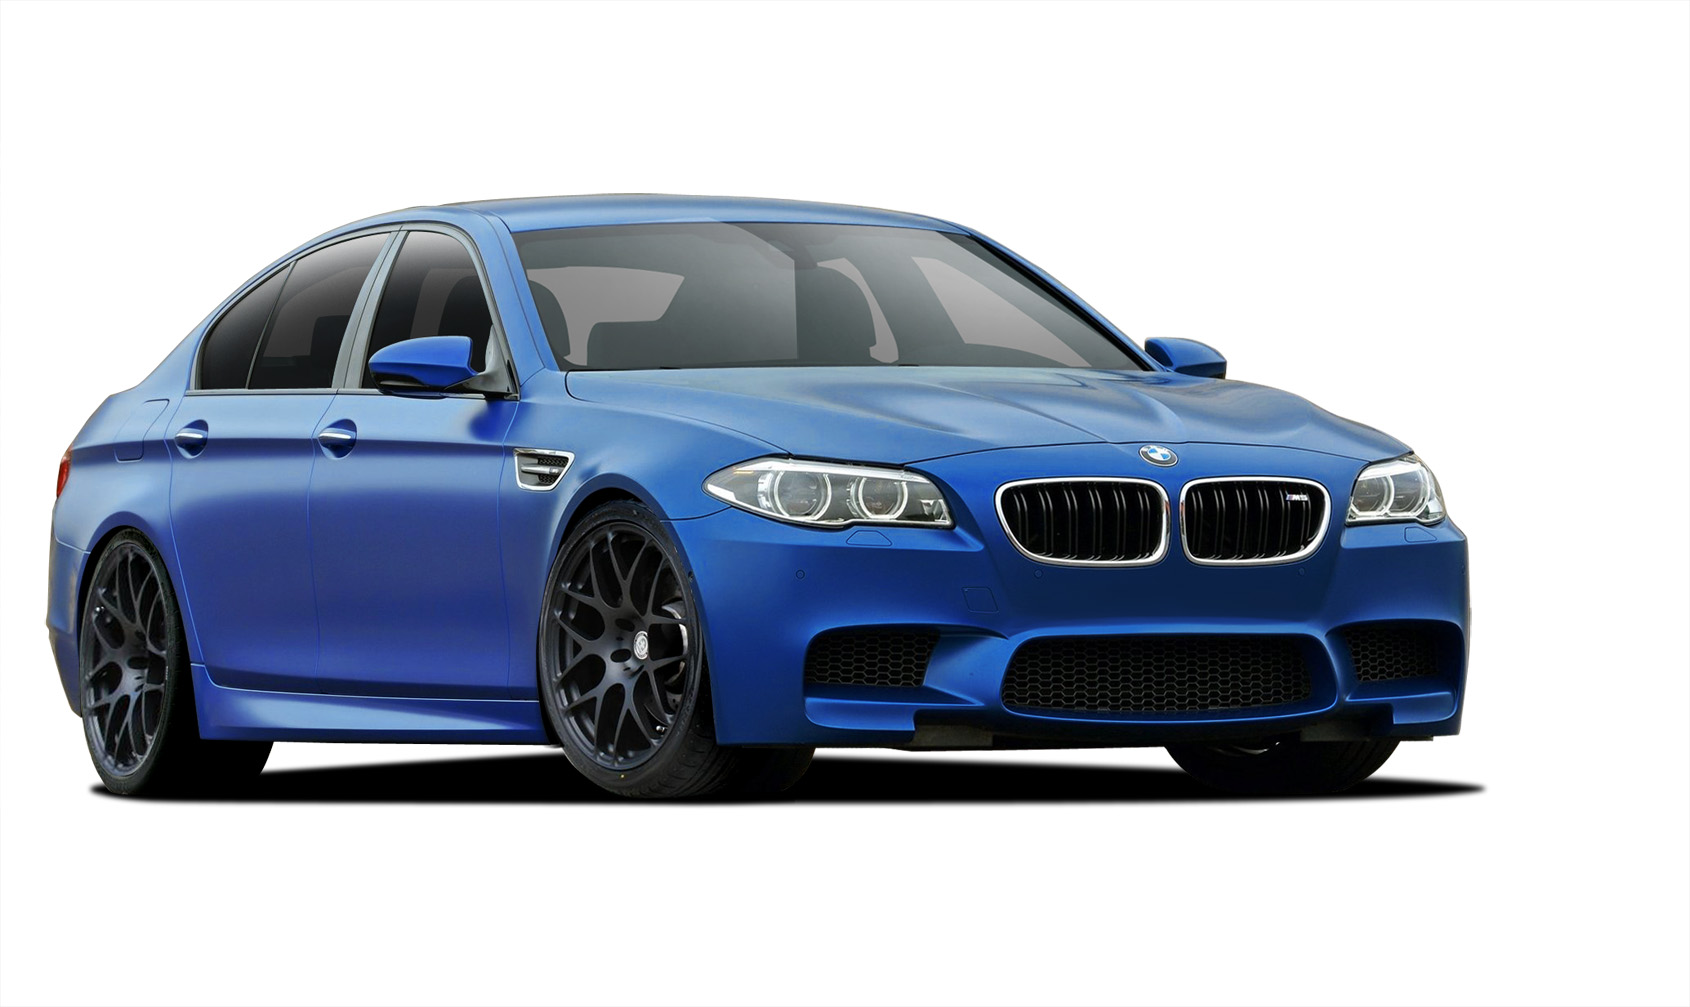 Polypropylene Body Kit Bodykit for 2015 BMW 5 Series 4DR - BMW 5 Series F10 Vaero M5 Look Conversion Kit ( with PDC , with Washer , with Camera ) - 6